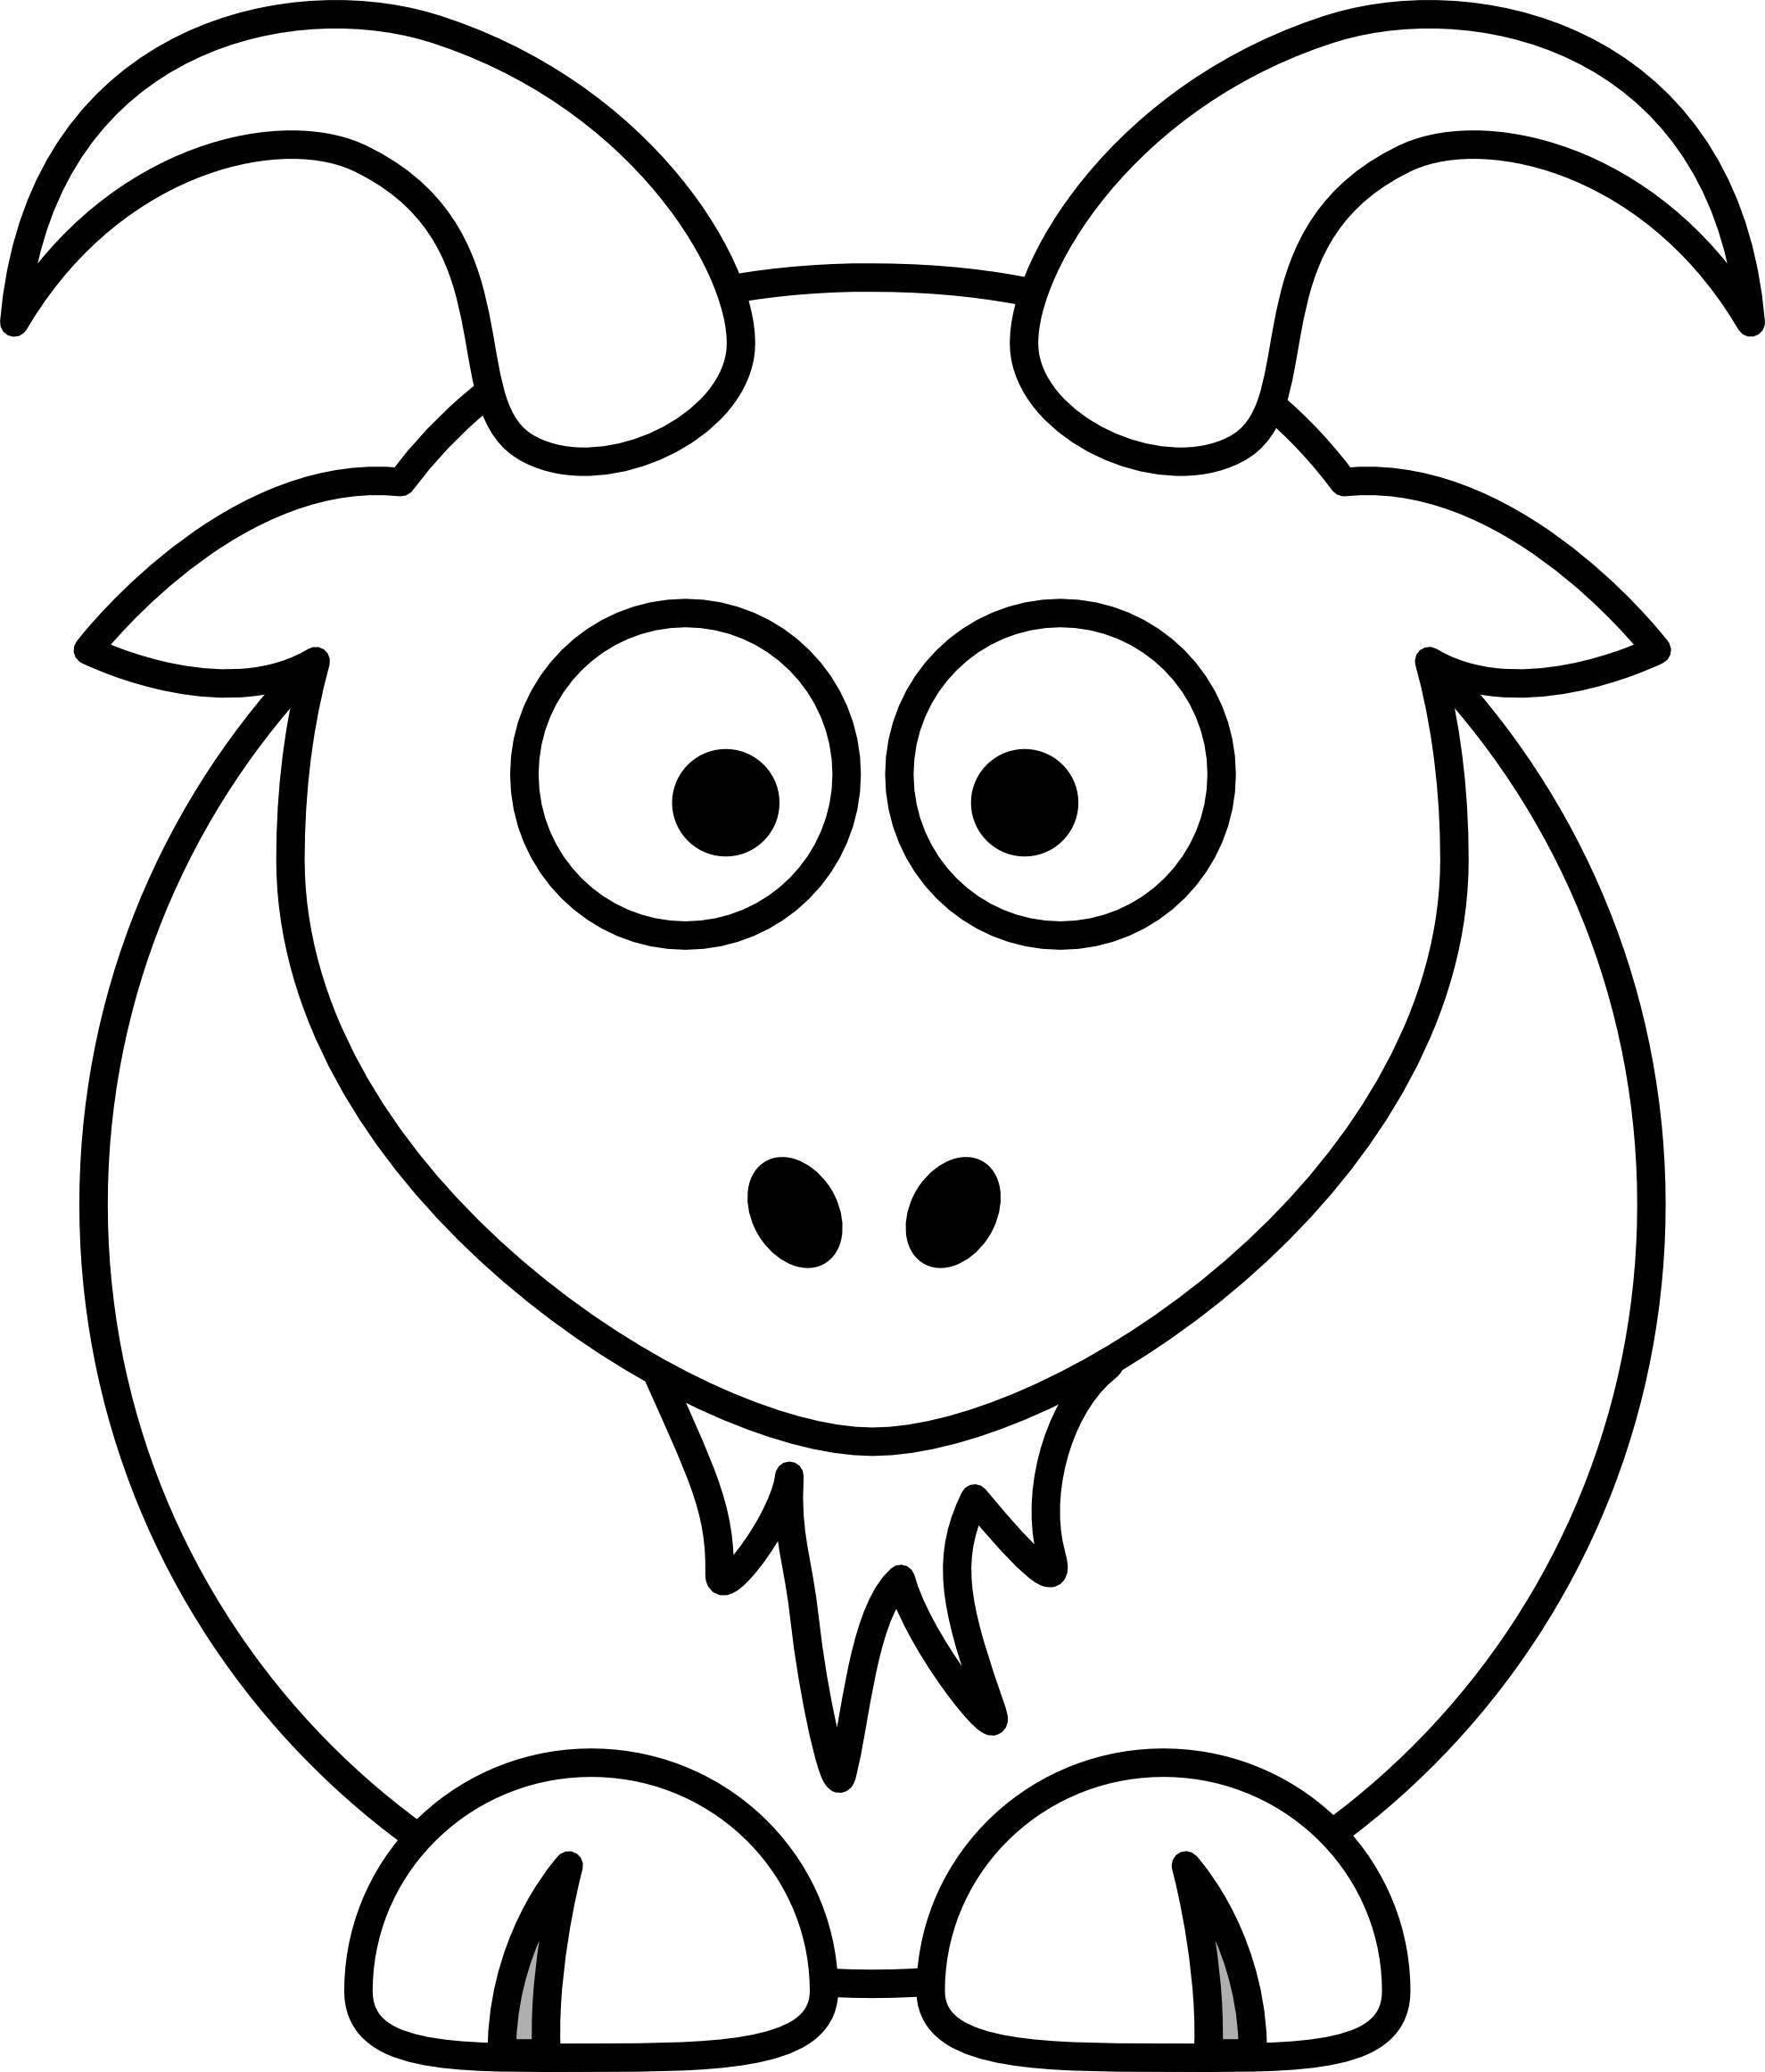 Black And White Cartoon Animals - Cliparts.co